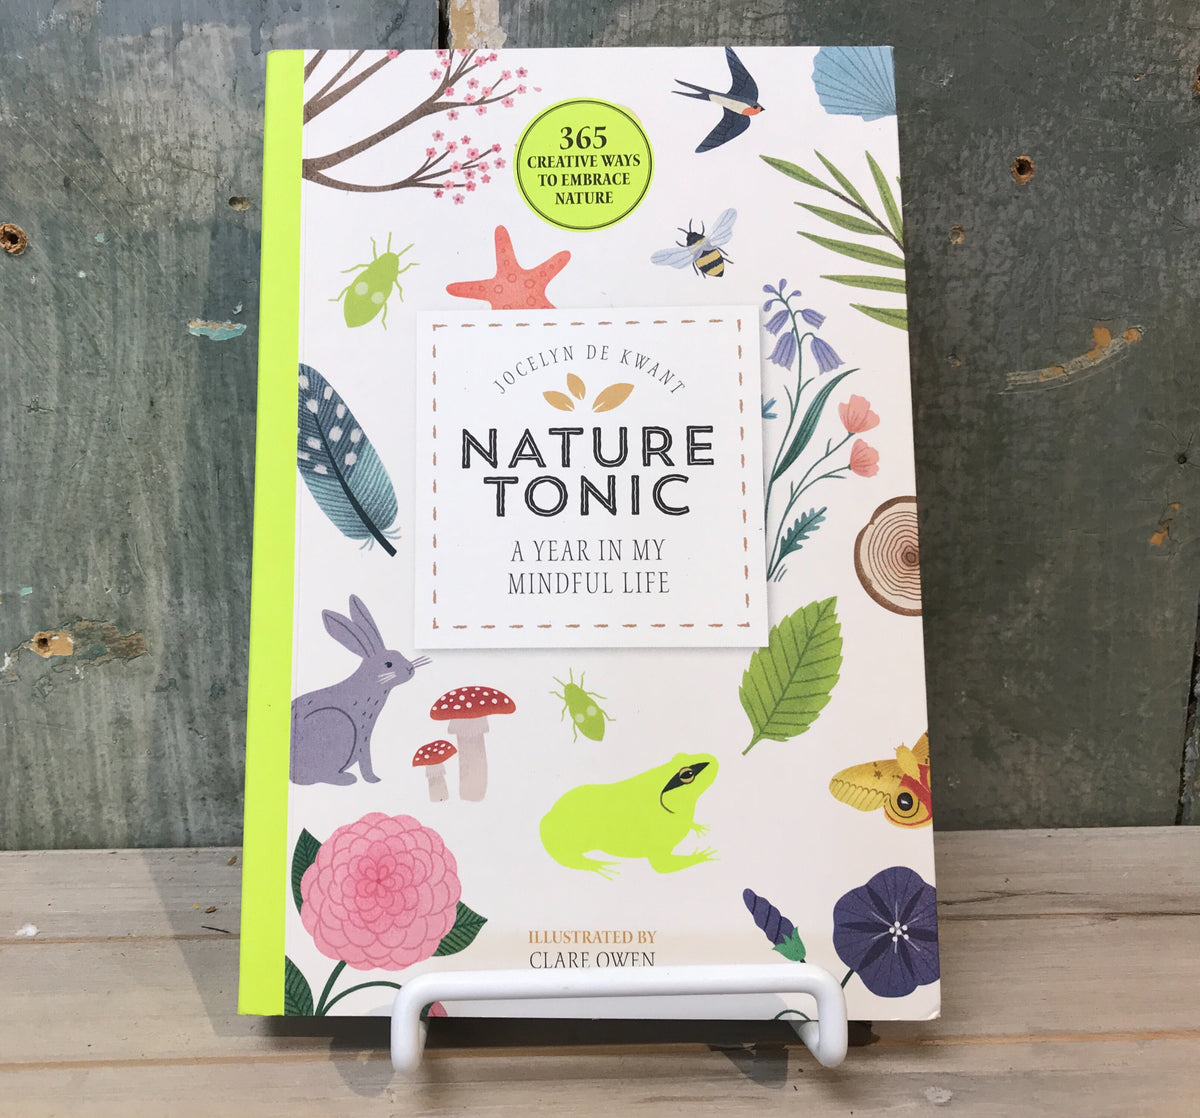 Nature Tonic - A Year In My Mindful Life